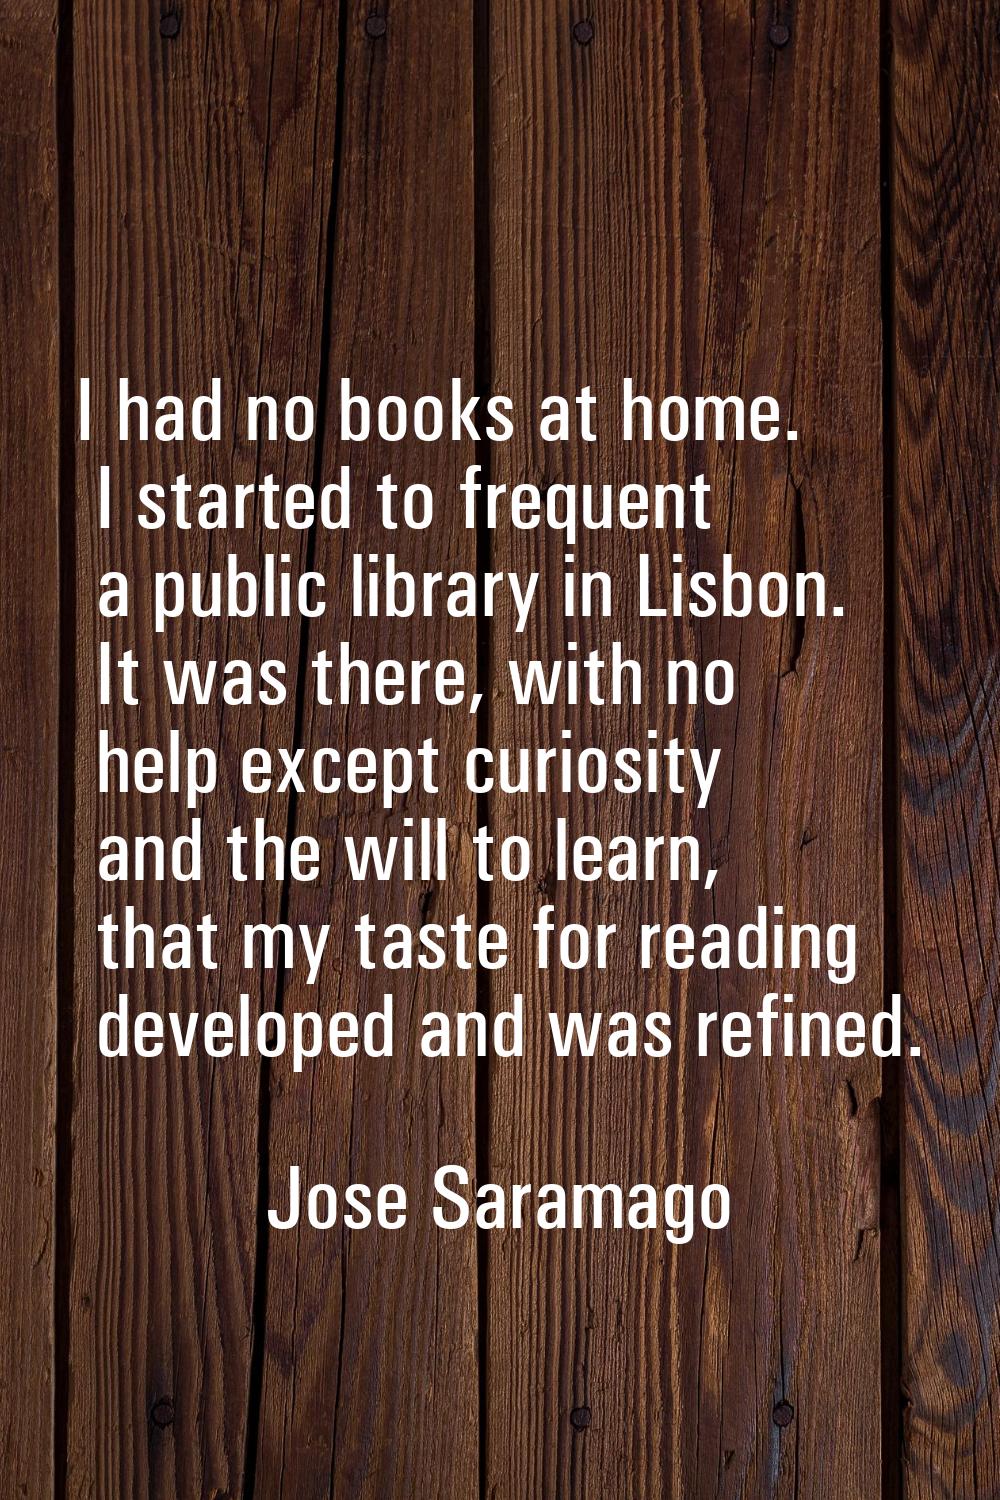 I had no books at home. I started to frequent a public library in Lisbon. It was there, with no hel